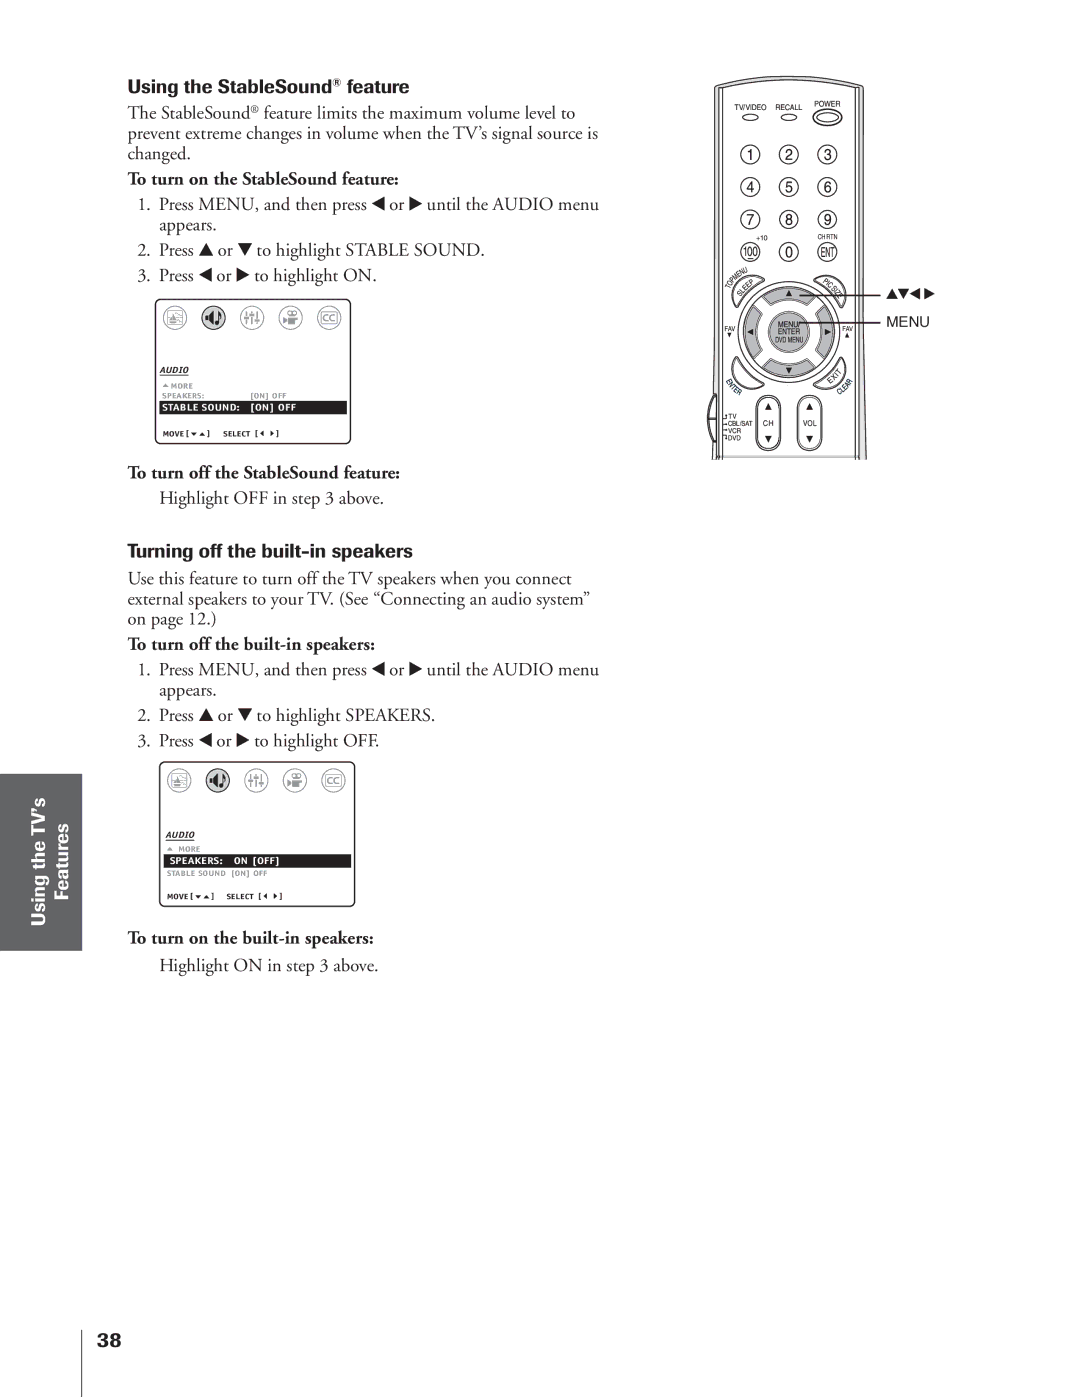 Toshiba 32AF14 owner manual Using the StableSound feature, Turning off the built-in speakers 